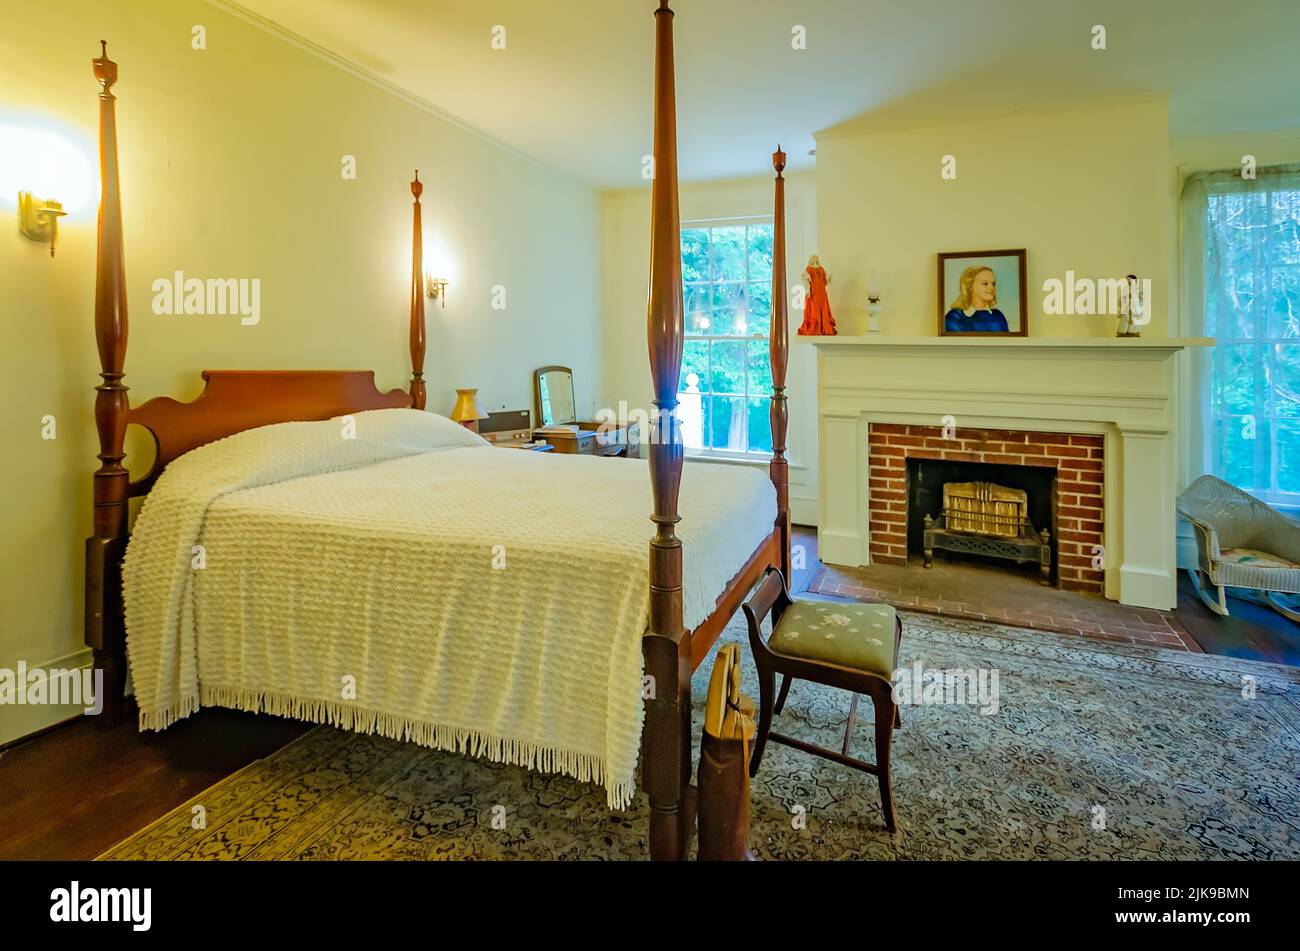 Jill Faulkner’s childhood bedroom is pictured at Rowan Oak, May 30, 2015, in Oxford, Mississippi. Stock Photo